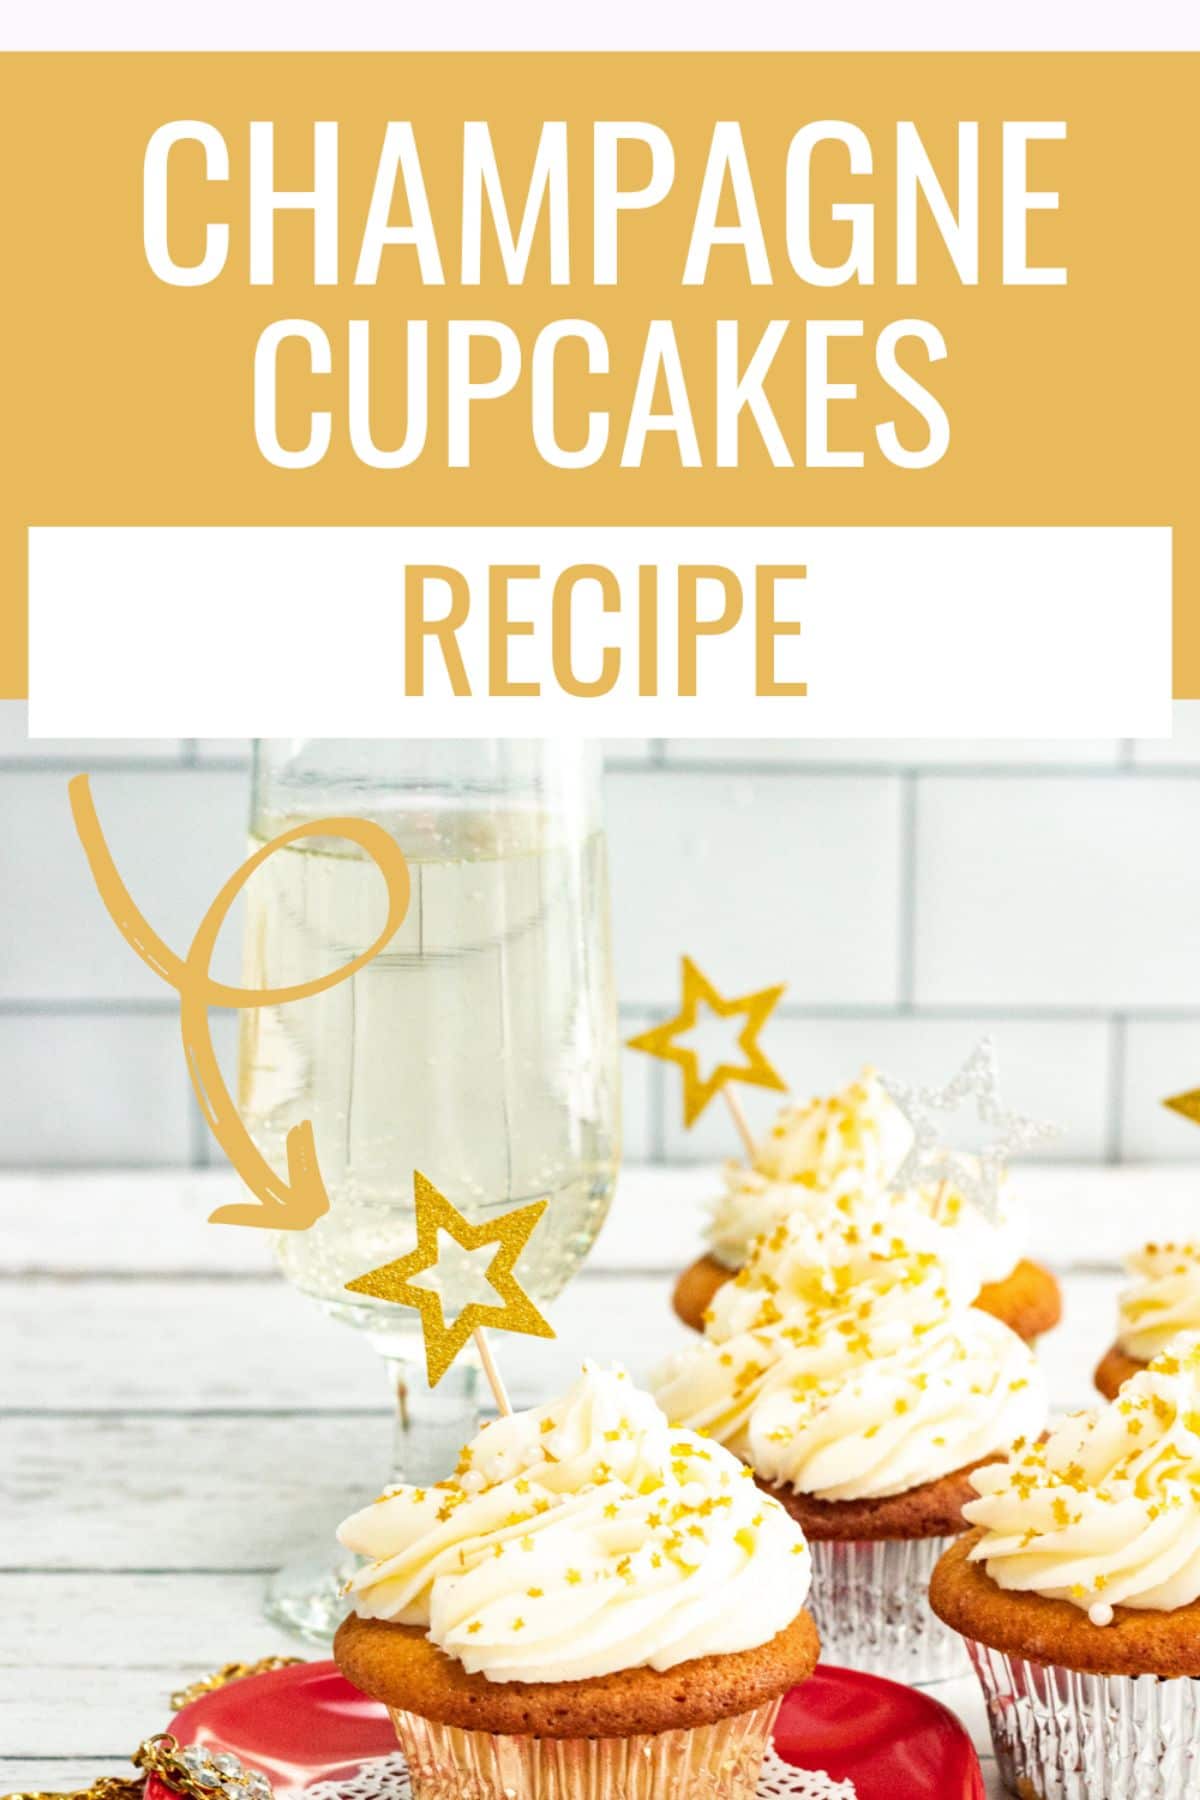 Champagne Cupcakes image with a large text at the upper half of the image saying 'Champagne Cupcakes Recipe'